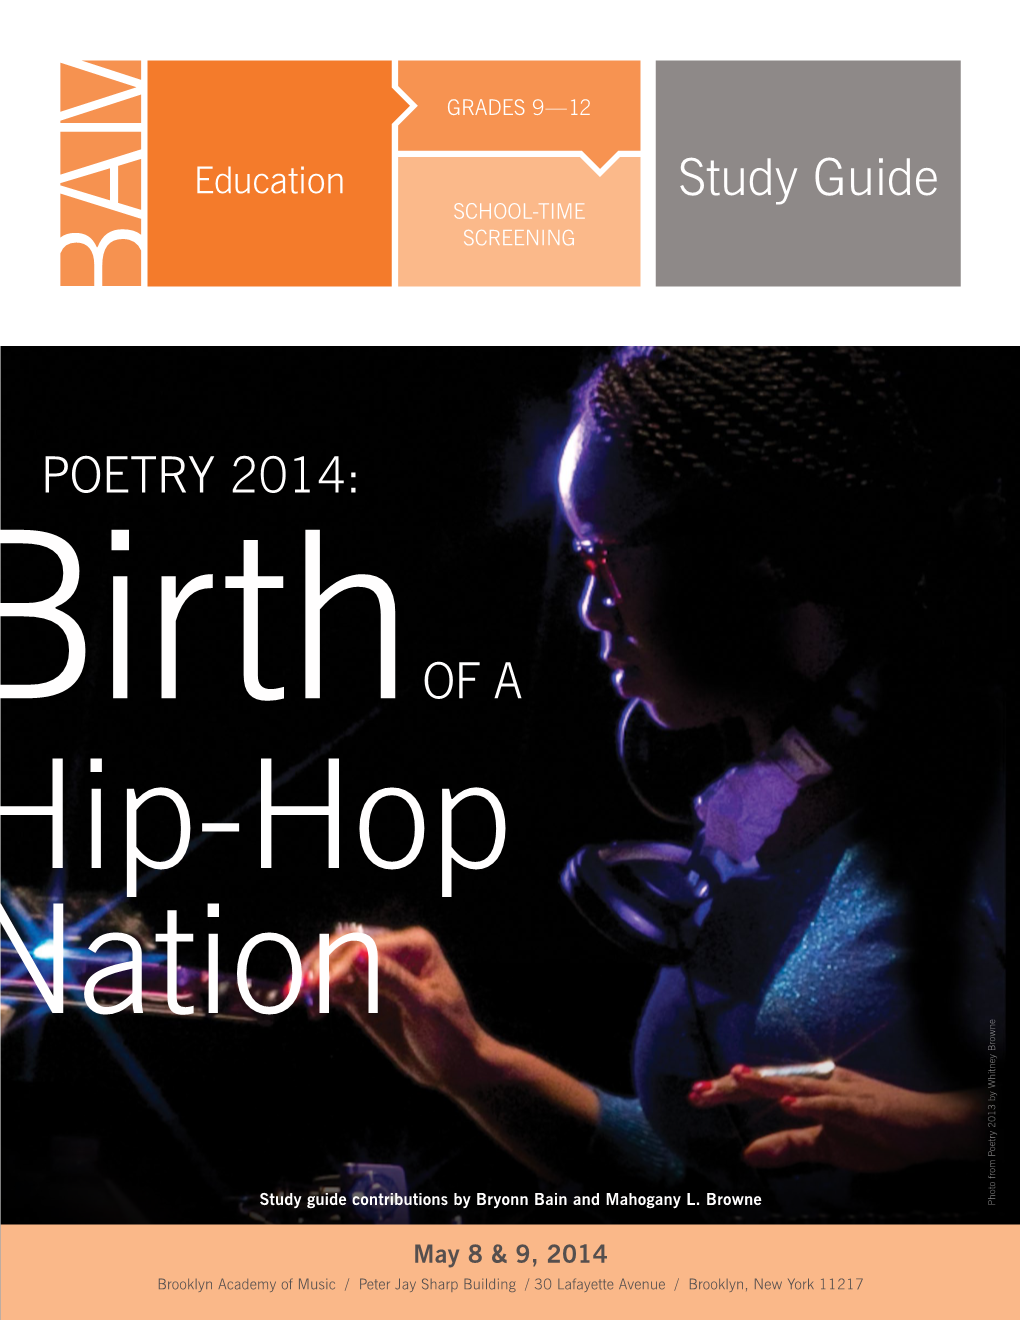 Study Guide Poetry 2014: Birth of a Hip-Hop Nation